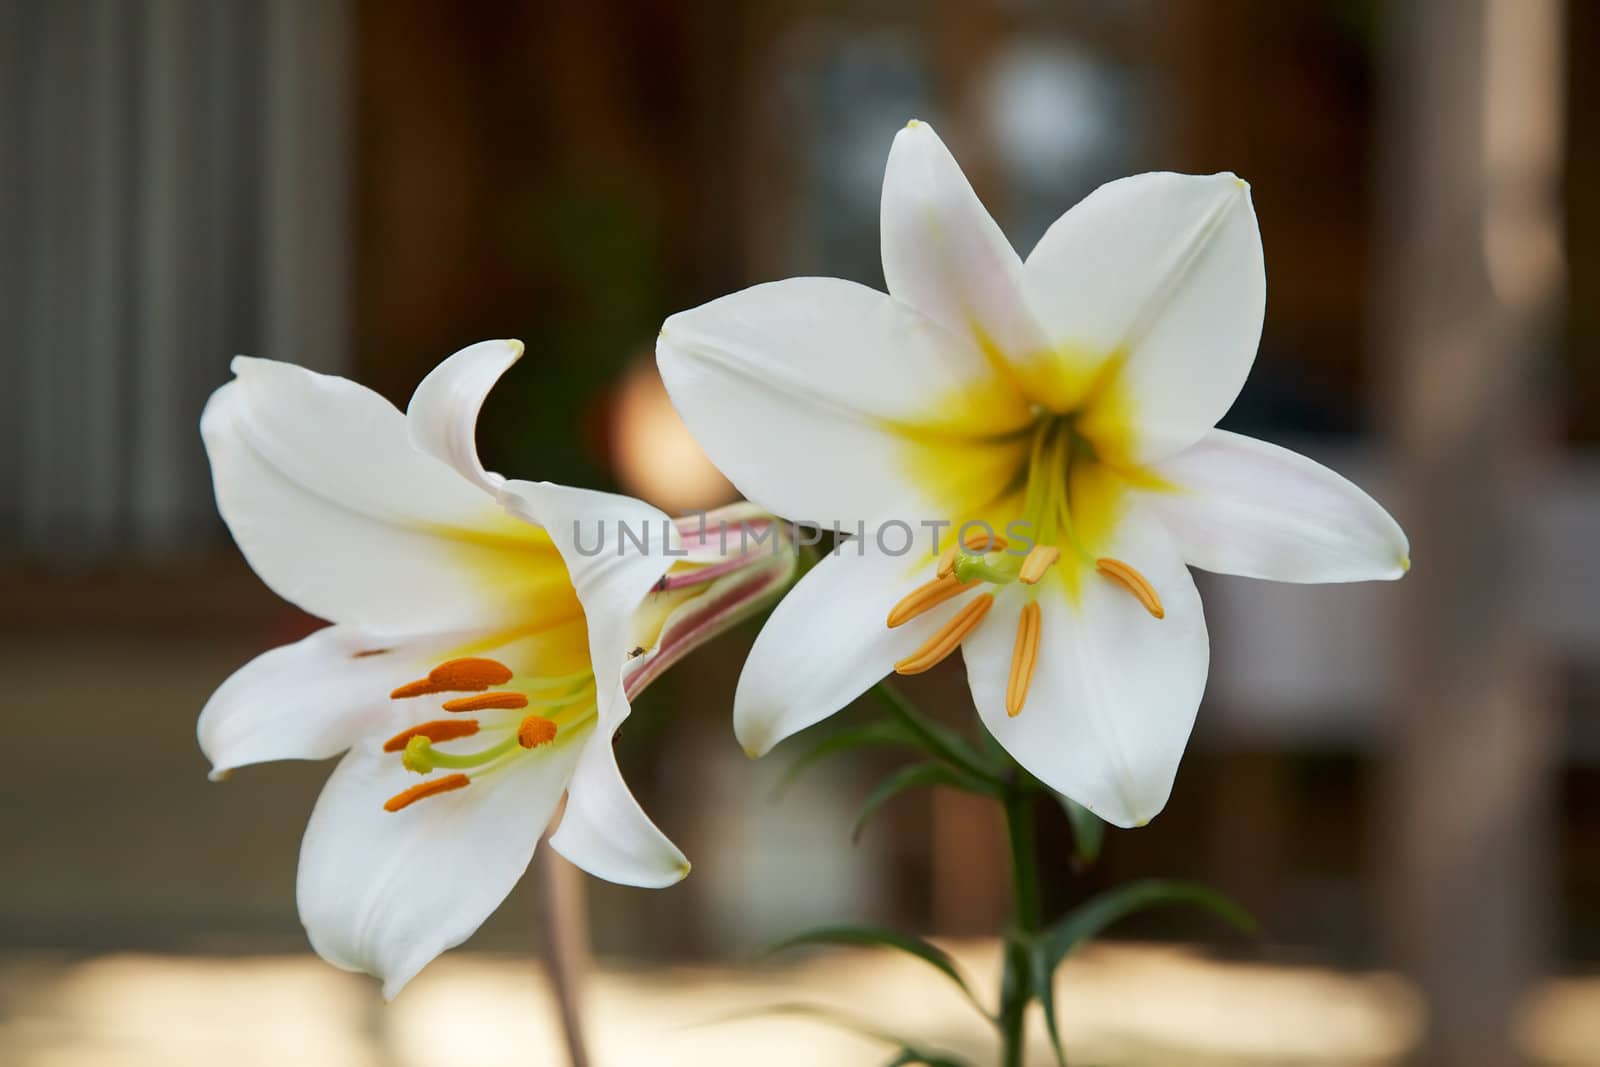 Two blossoms of white lily